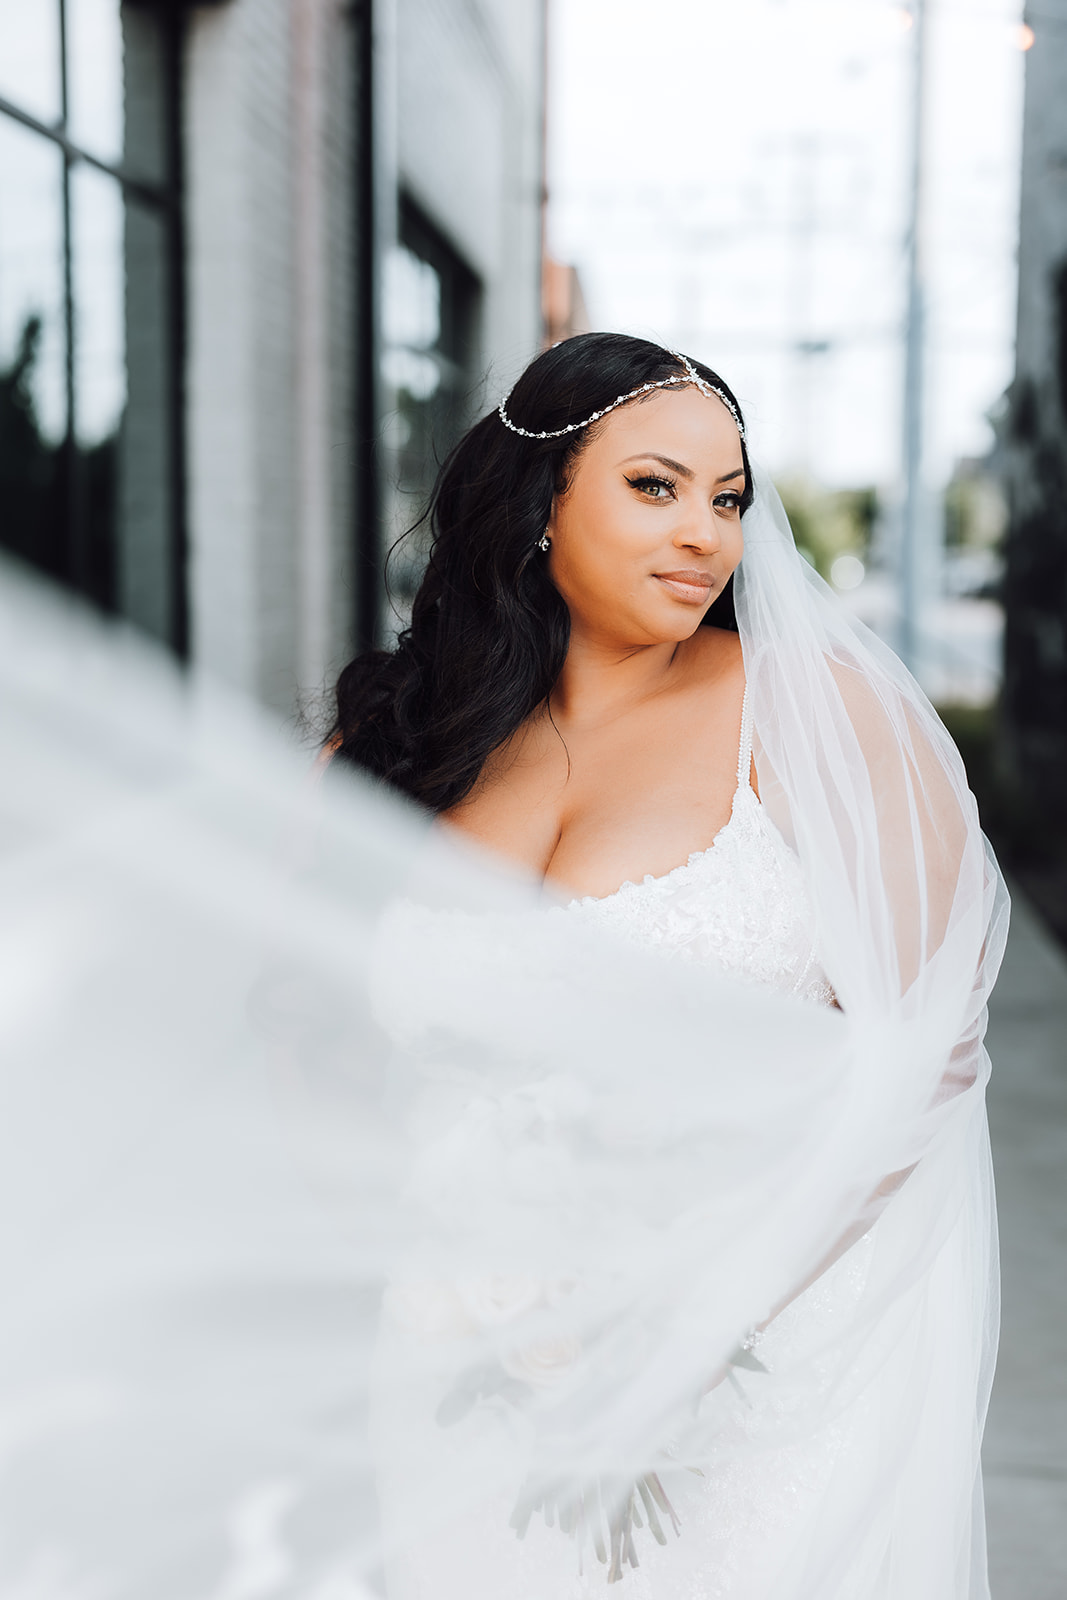 A bride stands in an alley while her veil blows in the wind around her 14Tenn Wedding